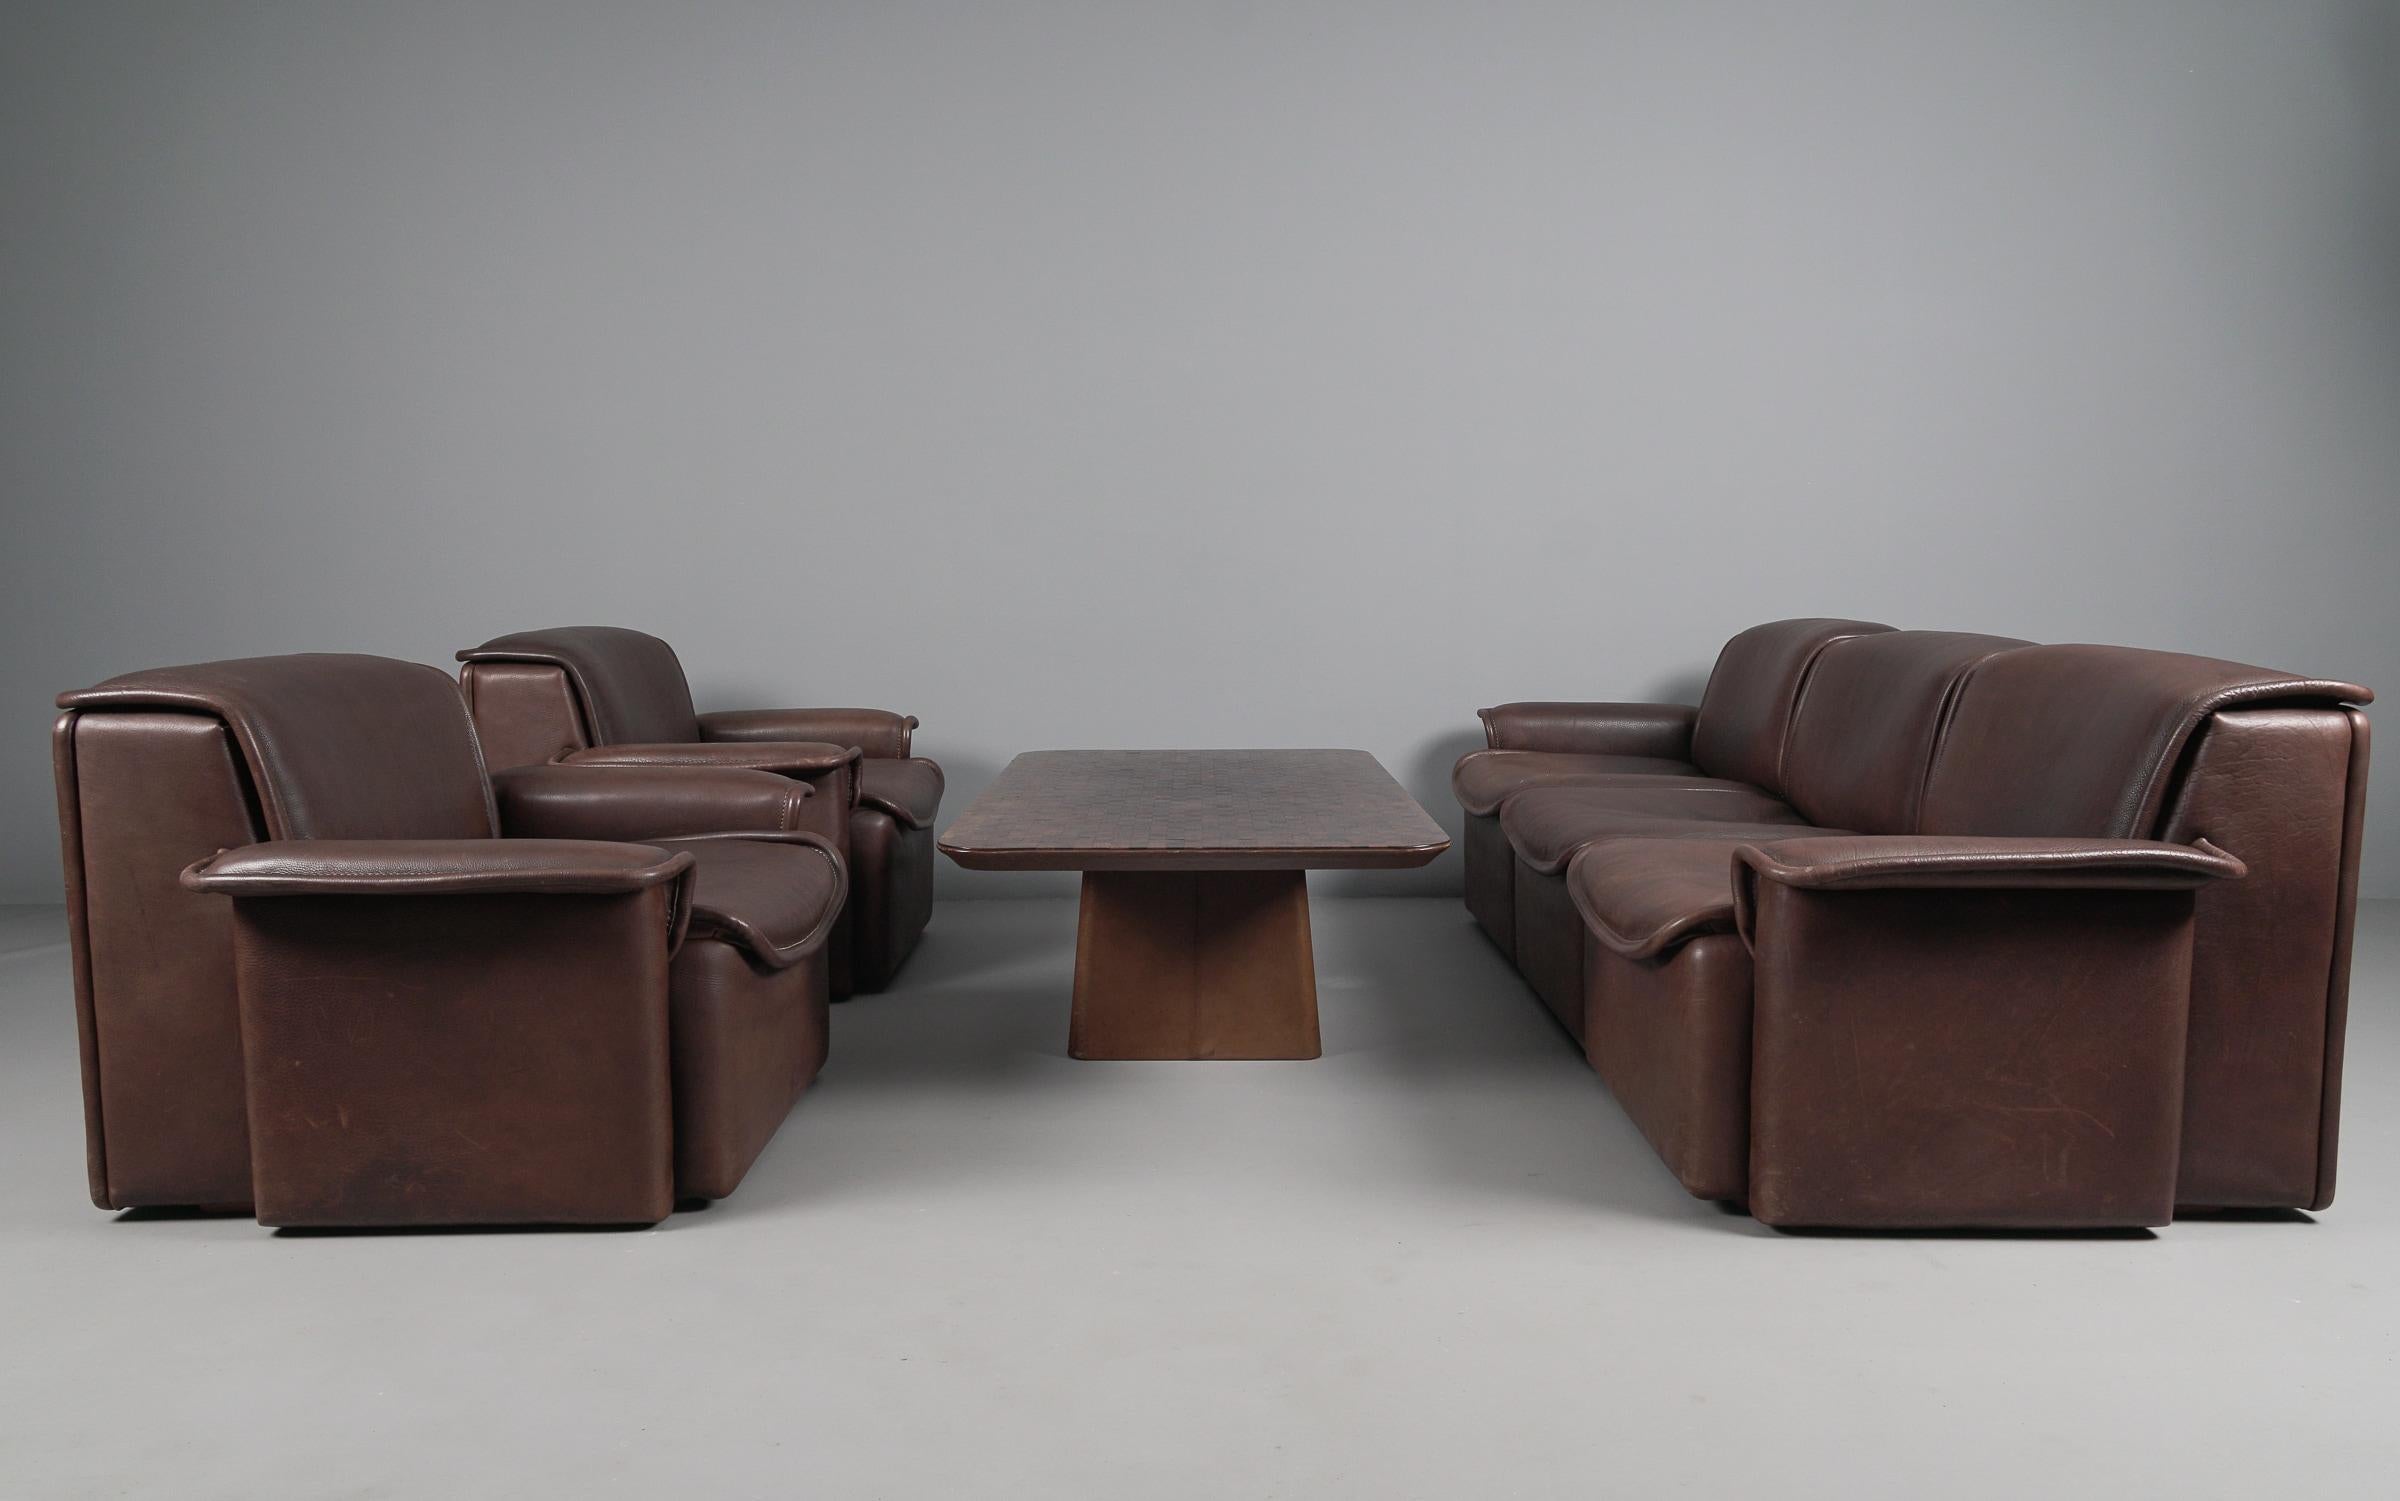 Three Seater Sofa by De Sede DS-12 in Brown Neck Leather, 1960s, Switzerland For Sale 8